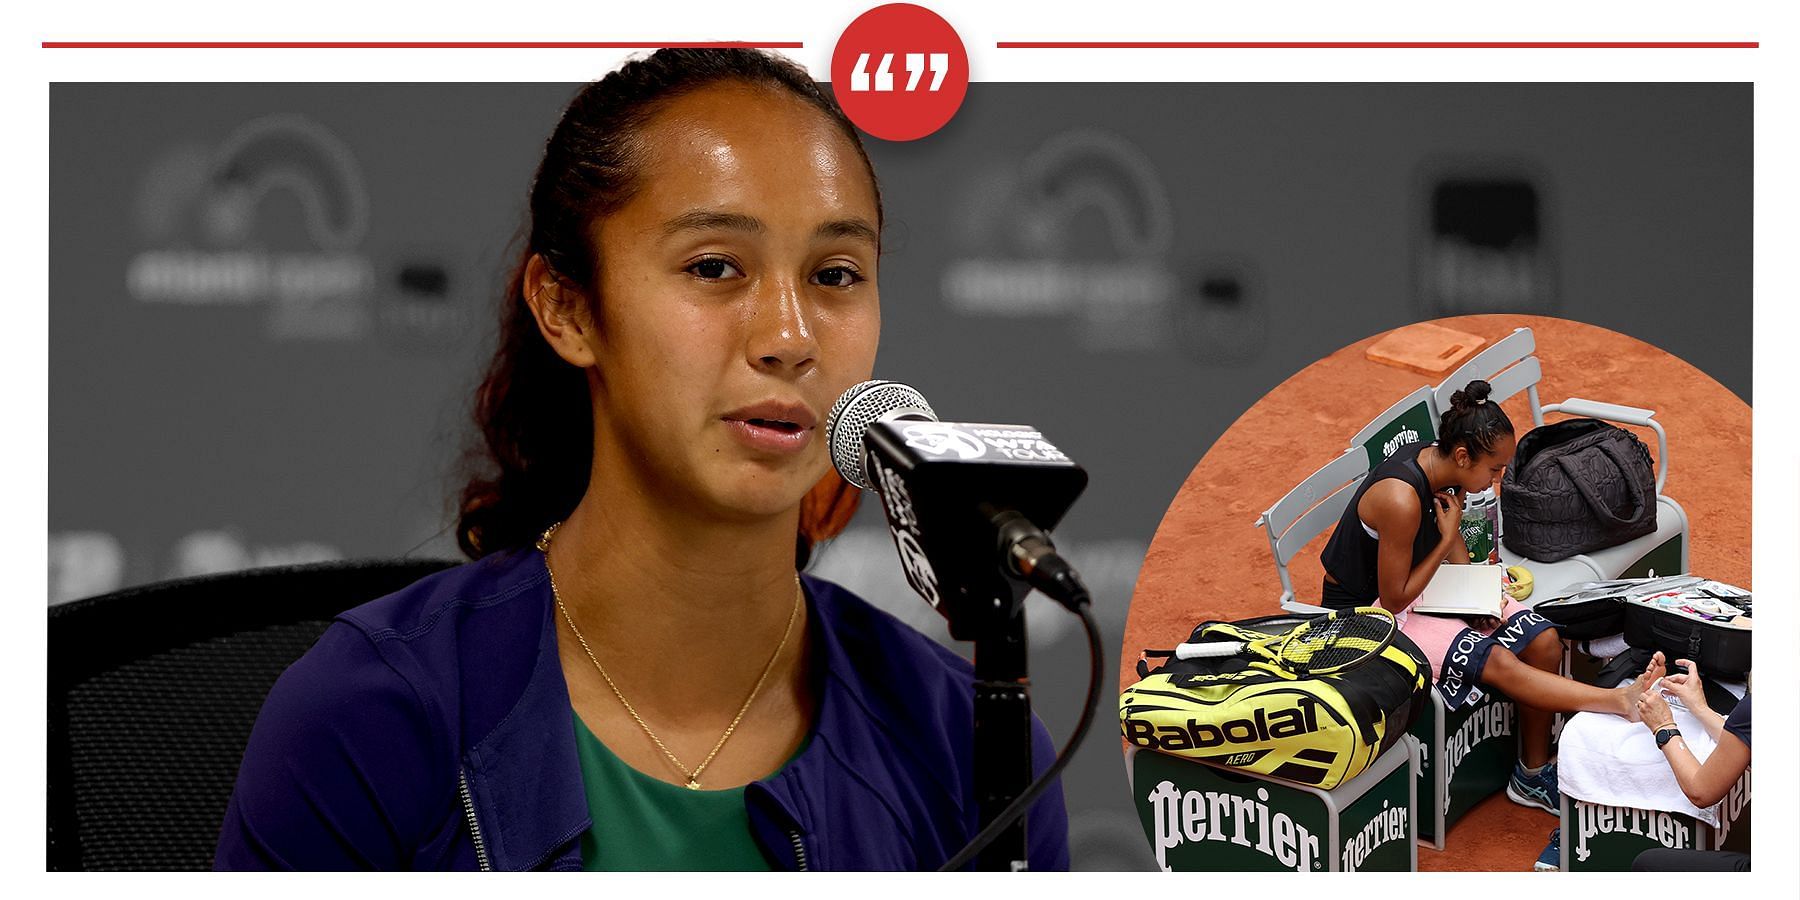 Leylah Fernandez sustained a stress fracture in her right foot at the French Open this year